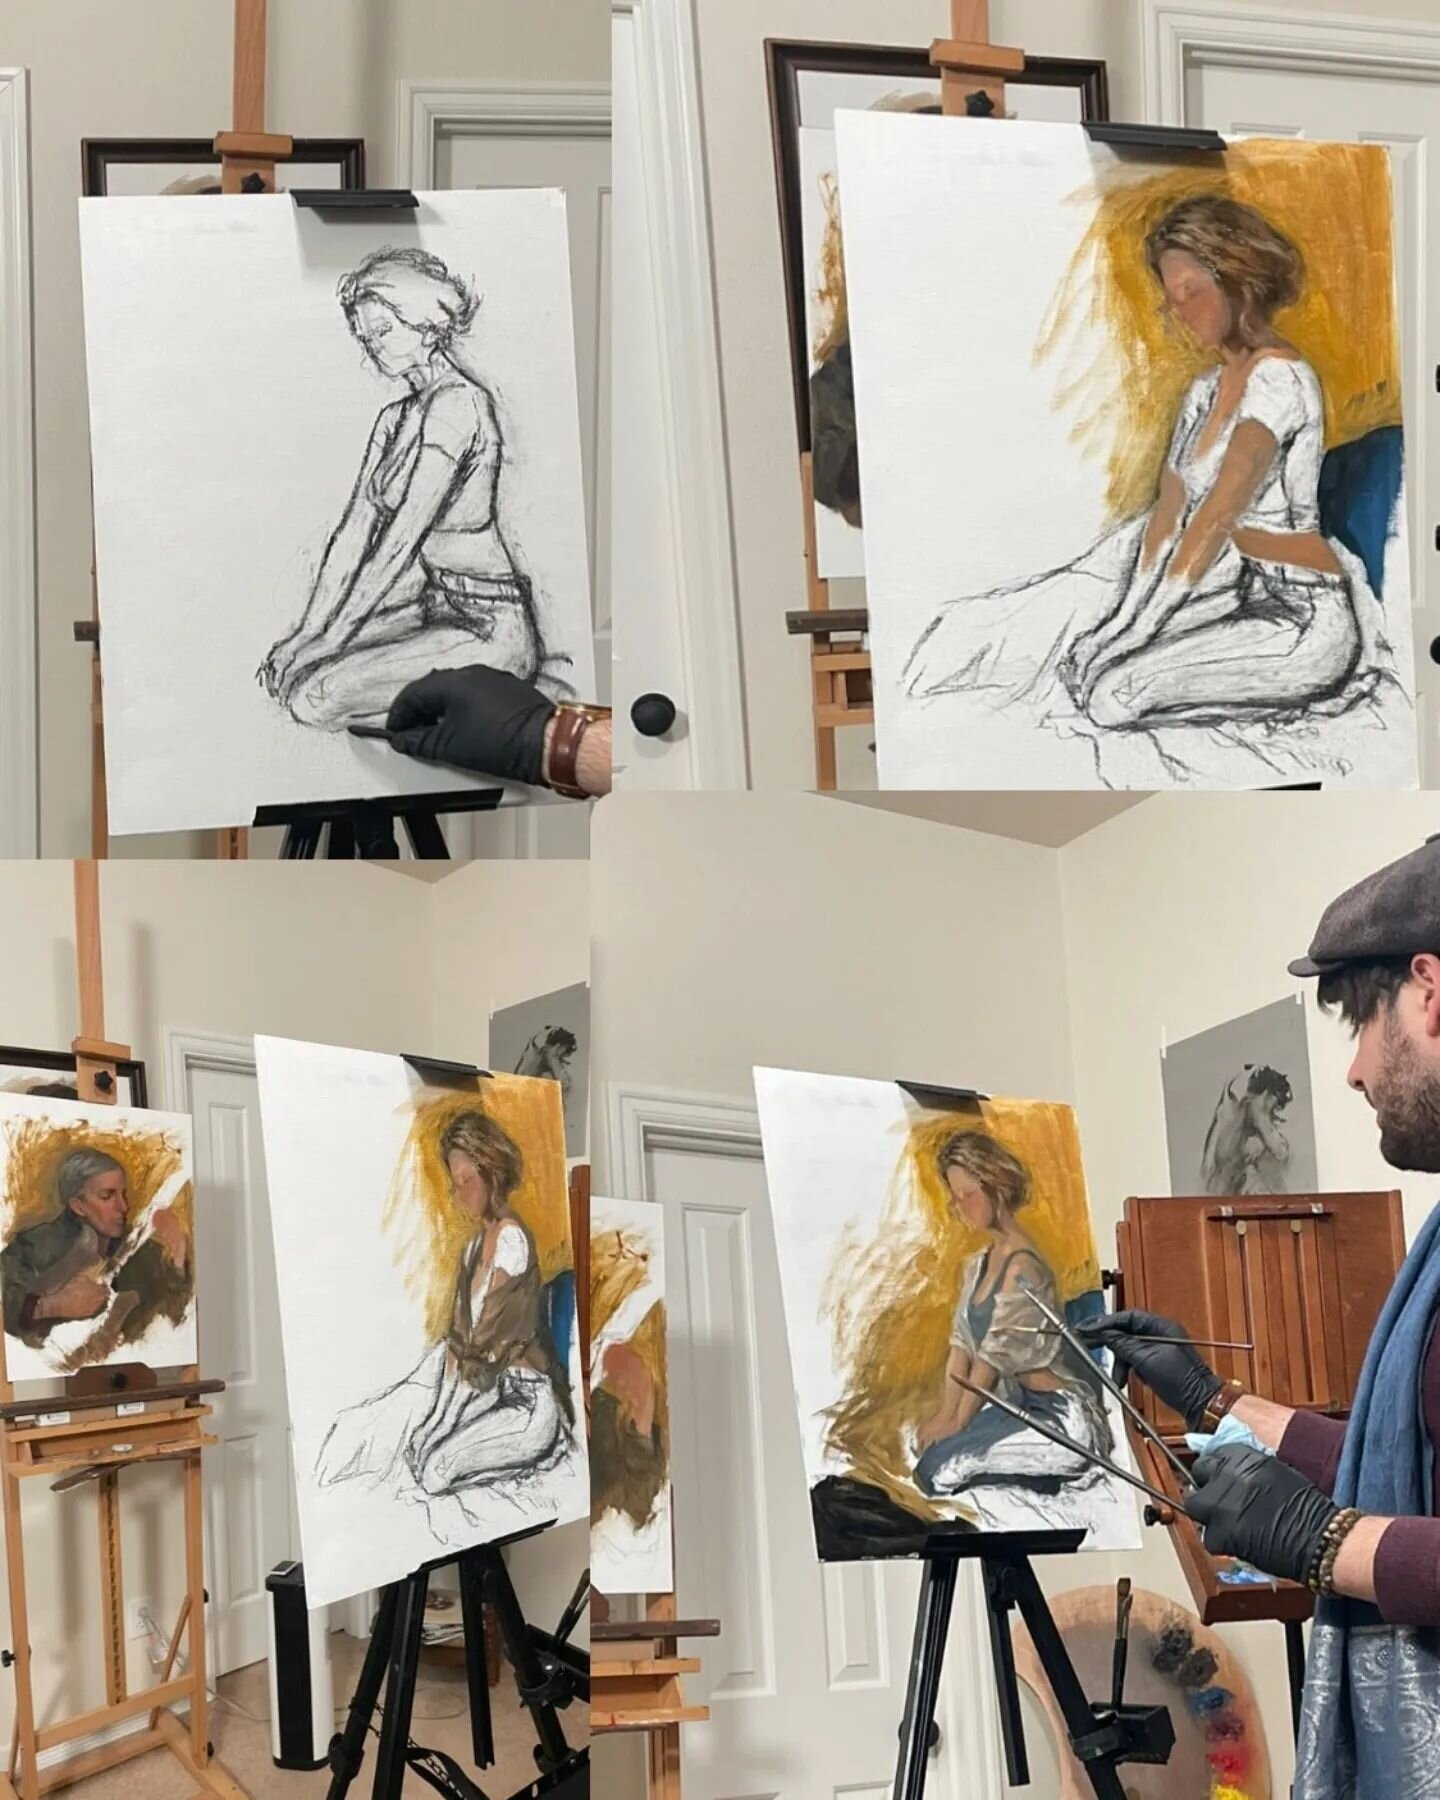 Progress shots from yesterday in the studio painting the wonderful @morgan_m_17 
Stay tuned for the follow up of our next sitting in mid april.
-
If you're interested in having your own beautiful commissioned painting please DM me so we may discuss w